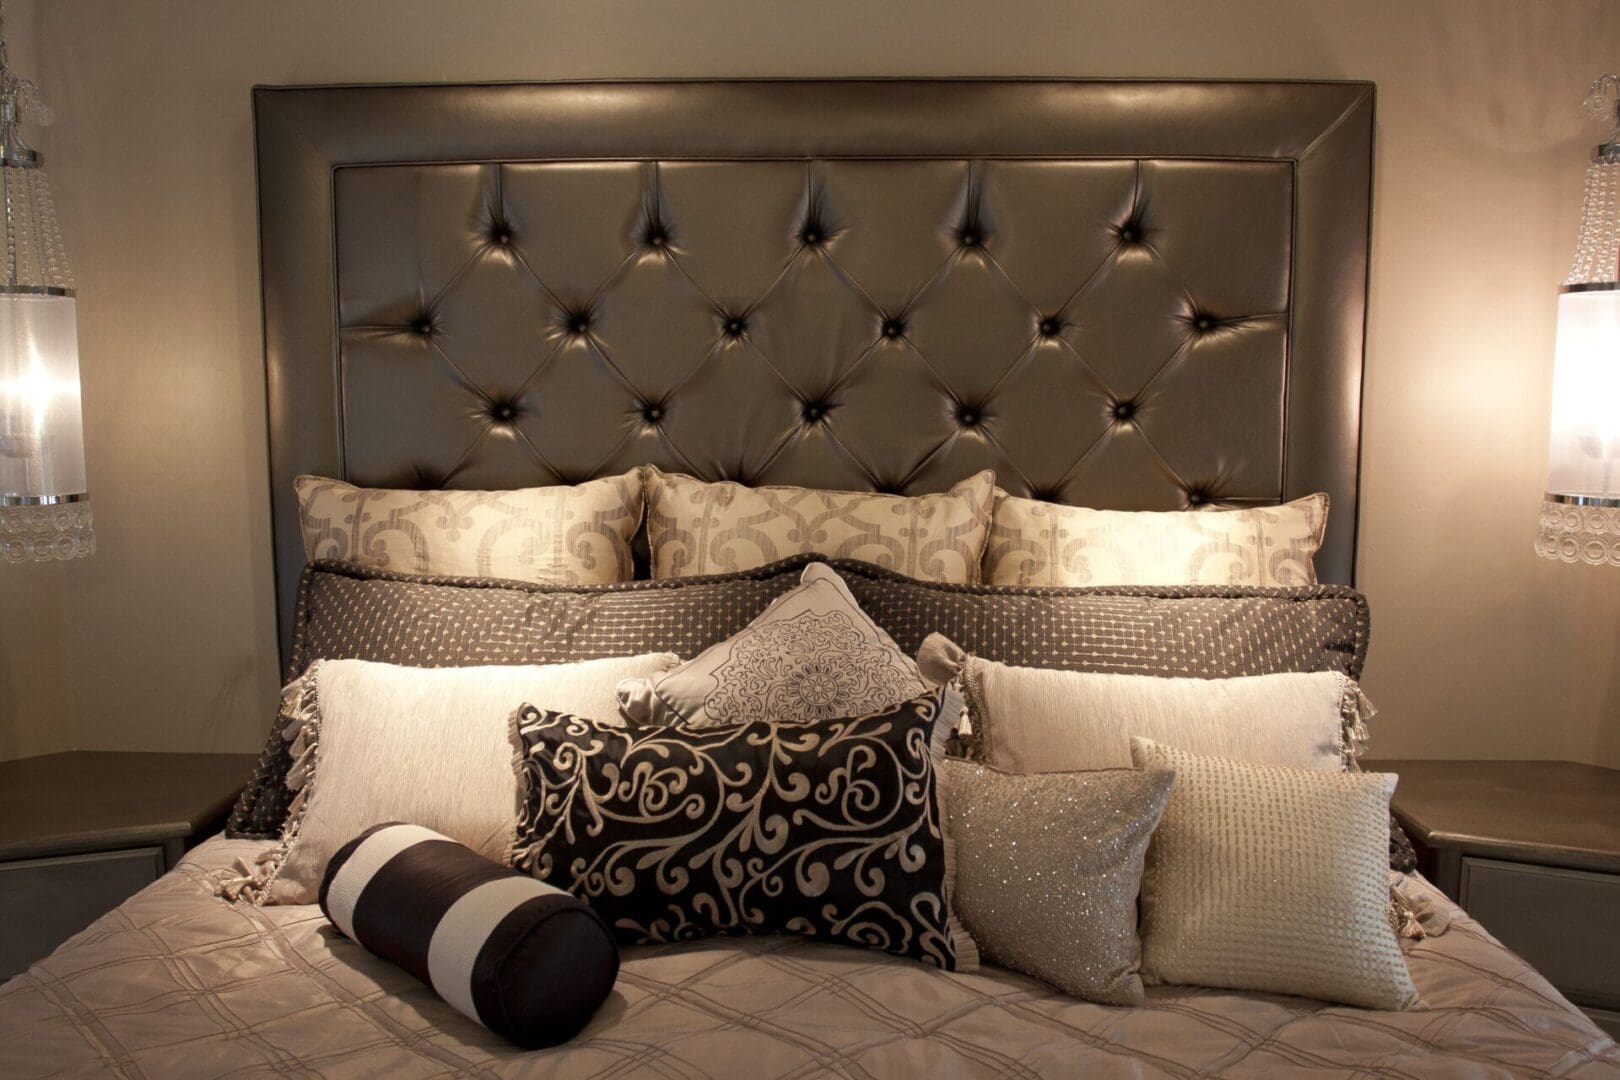 A bed with pillows and a headboard